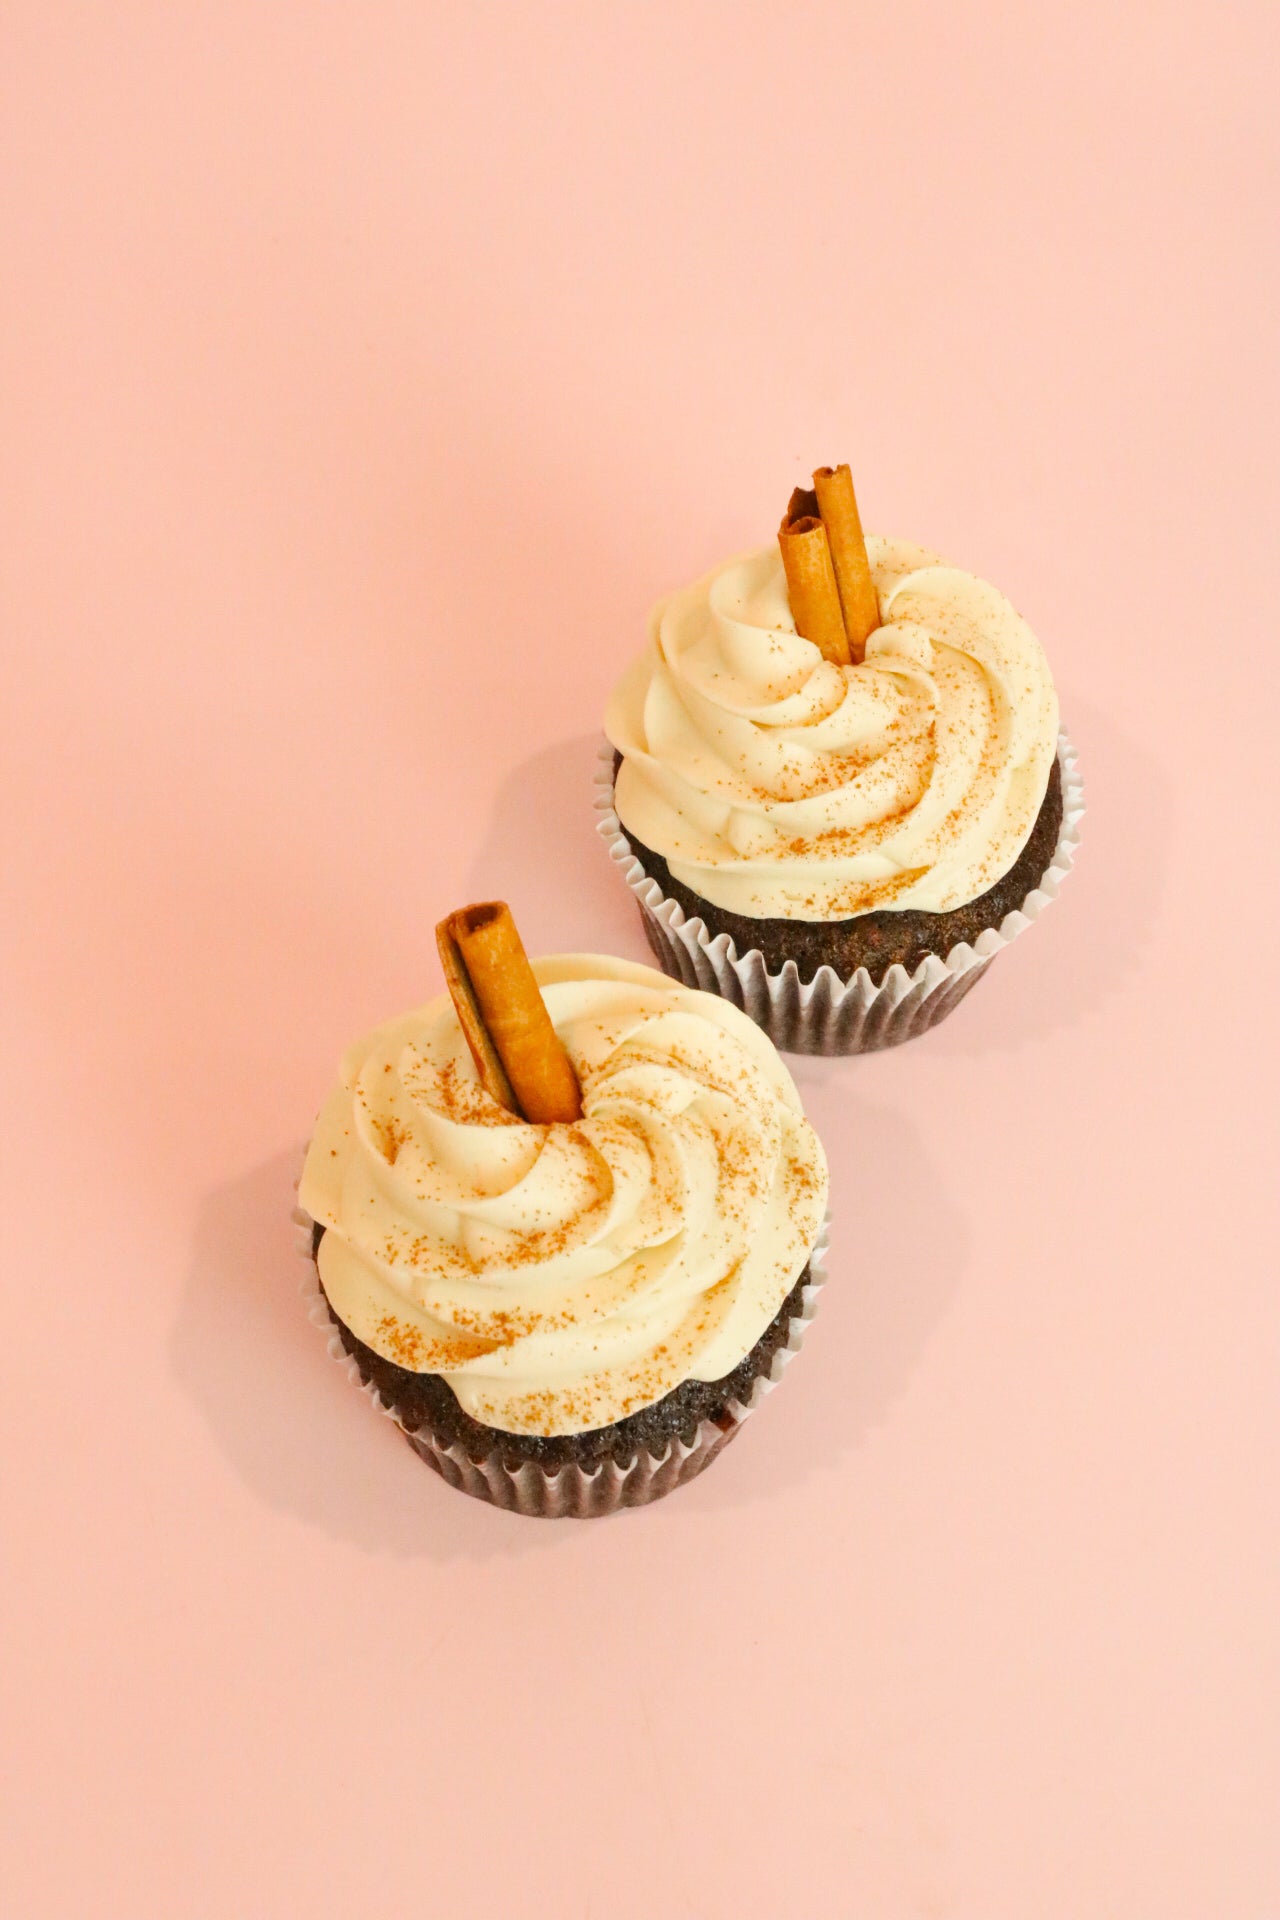 Two cupcakes with white cream decor sprinkled with cinnamon and cinnamon stick on top of it